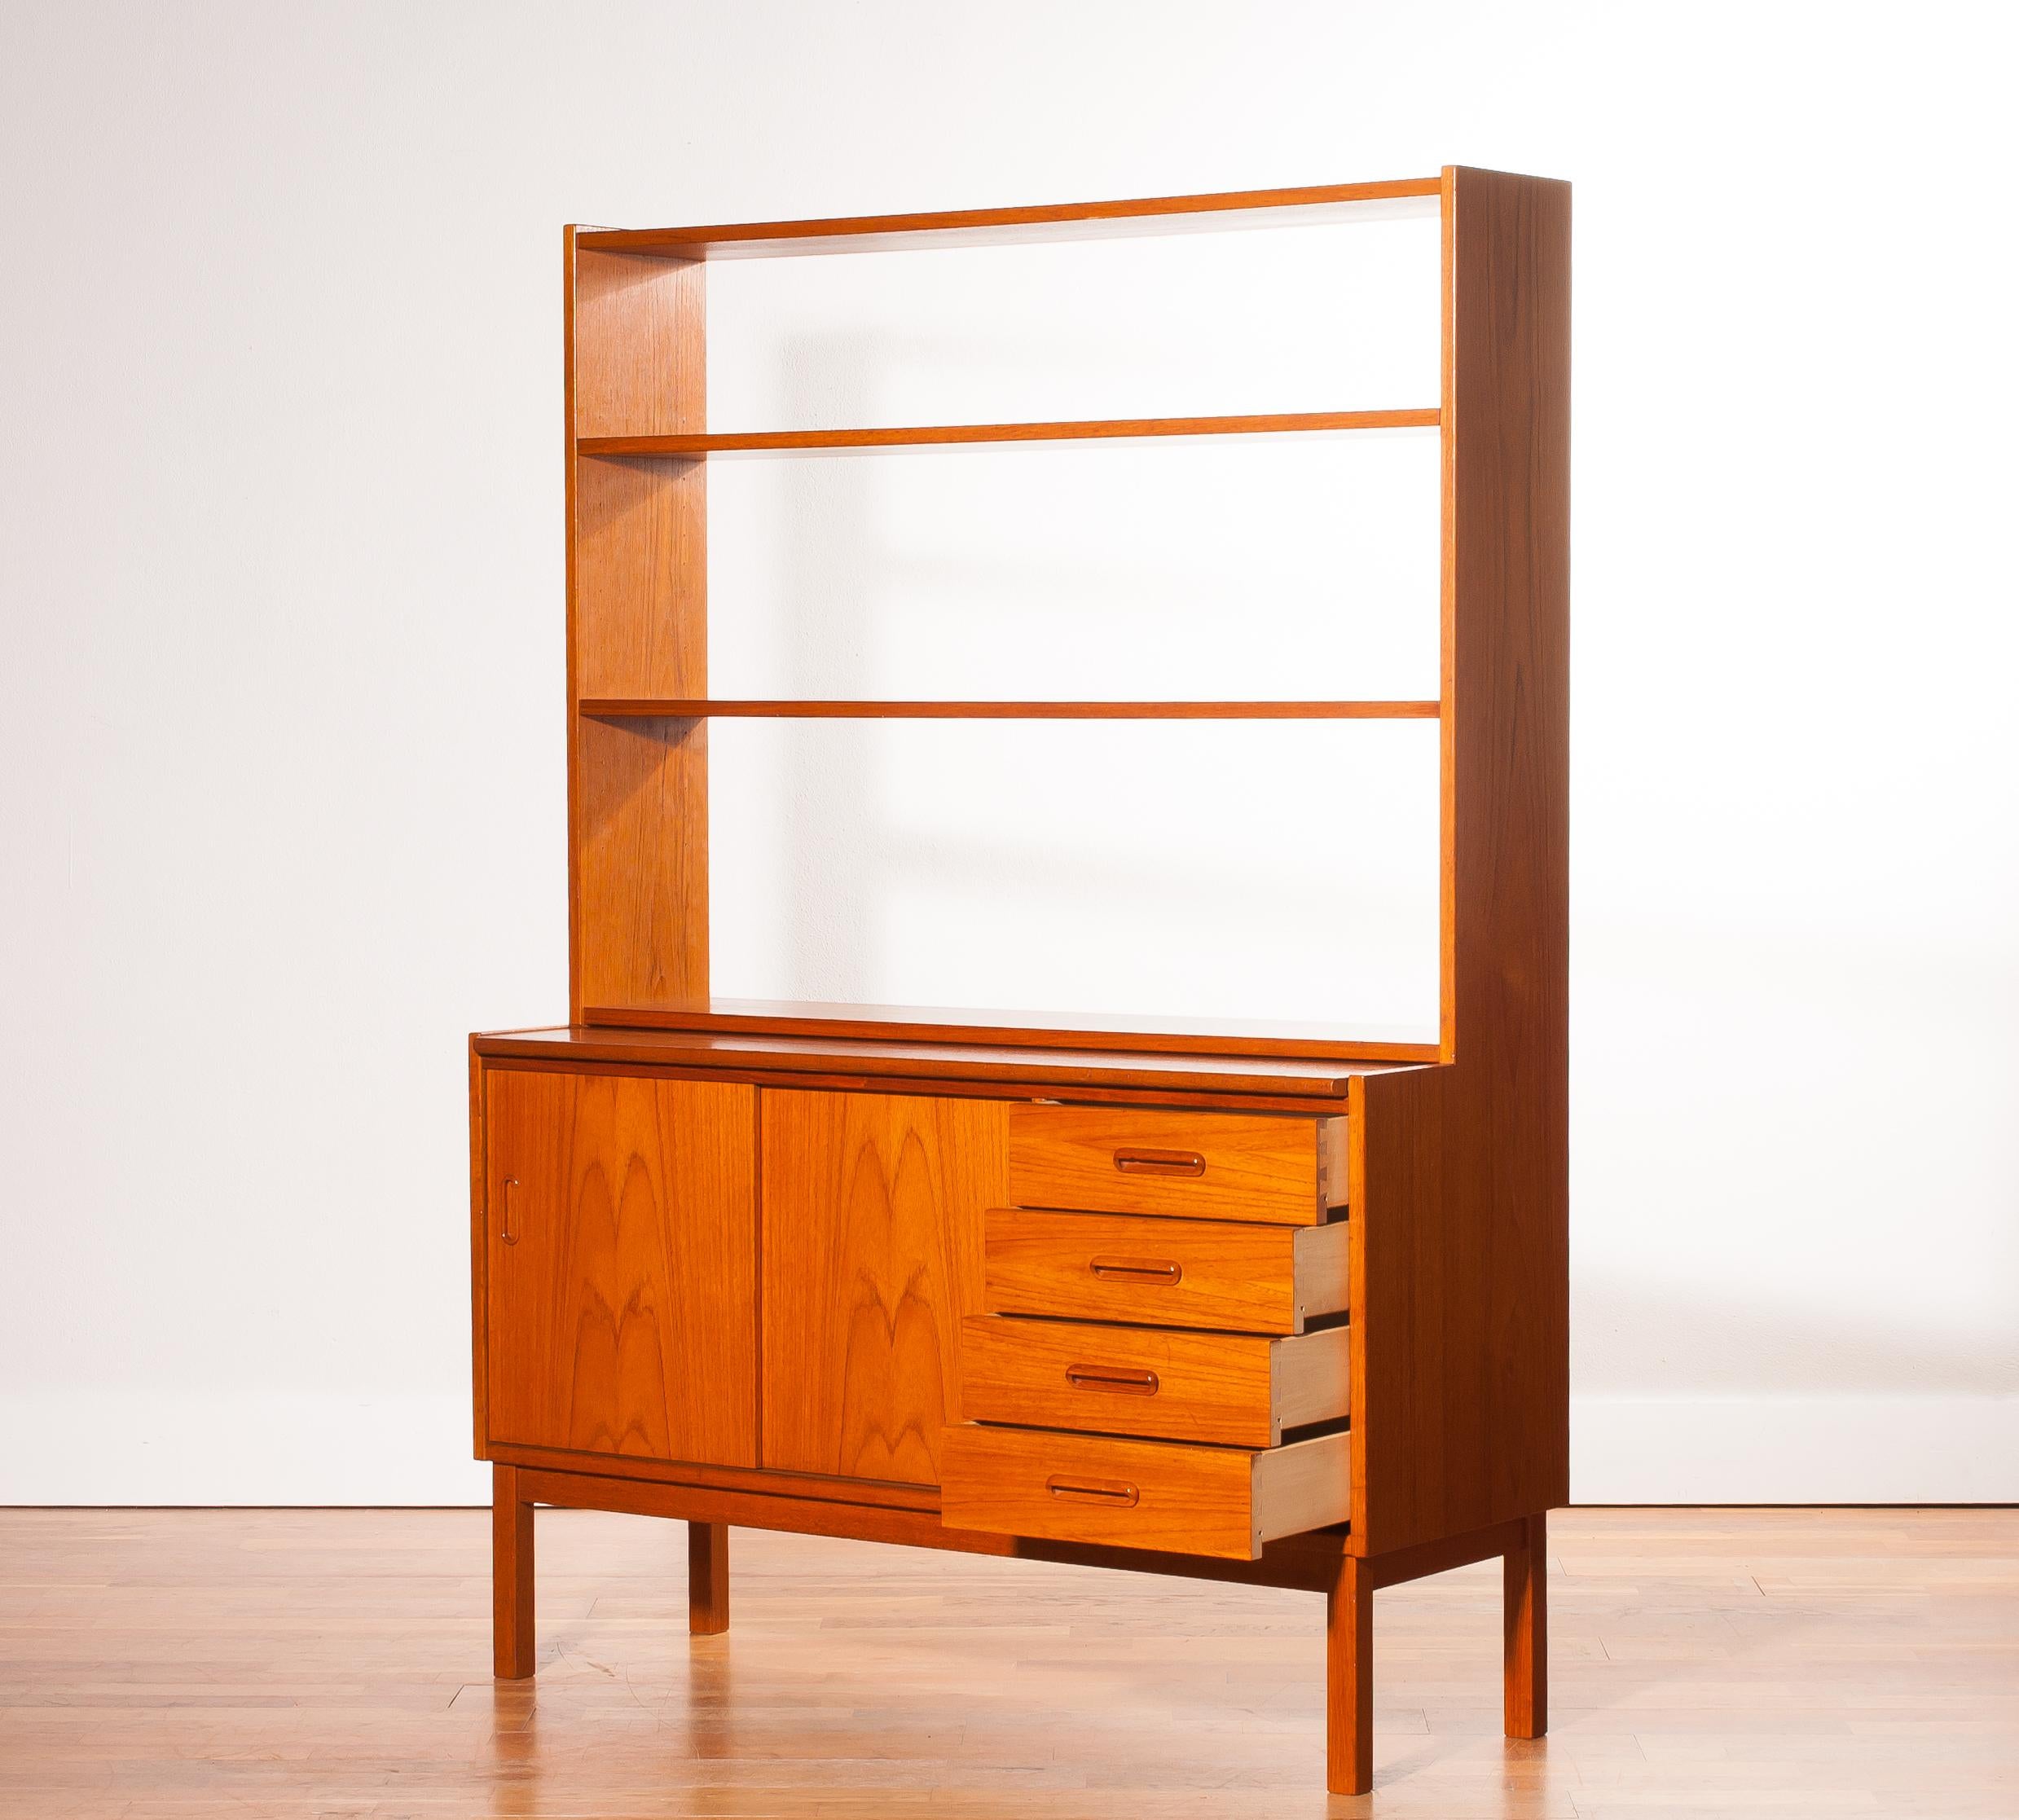 1960s, Teak Bookcase with Slid Able Writing or Working Space from Sweden 1